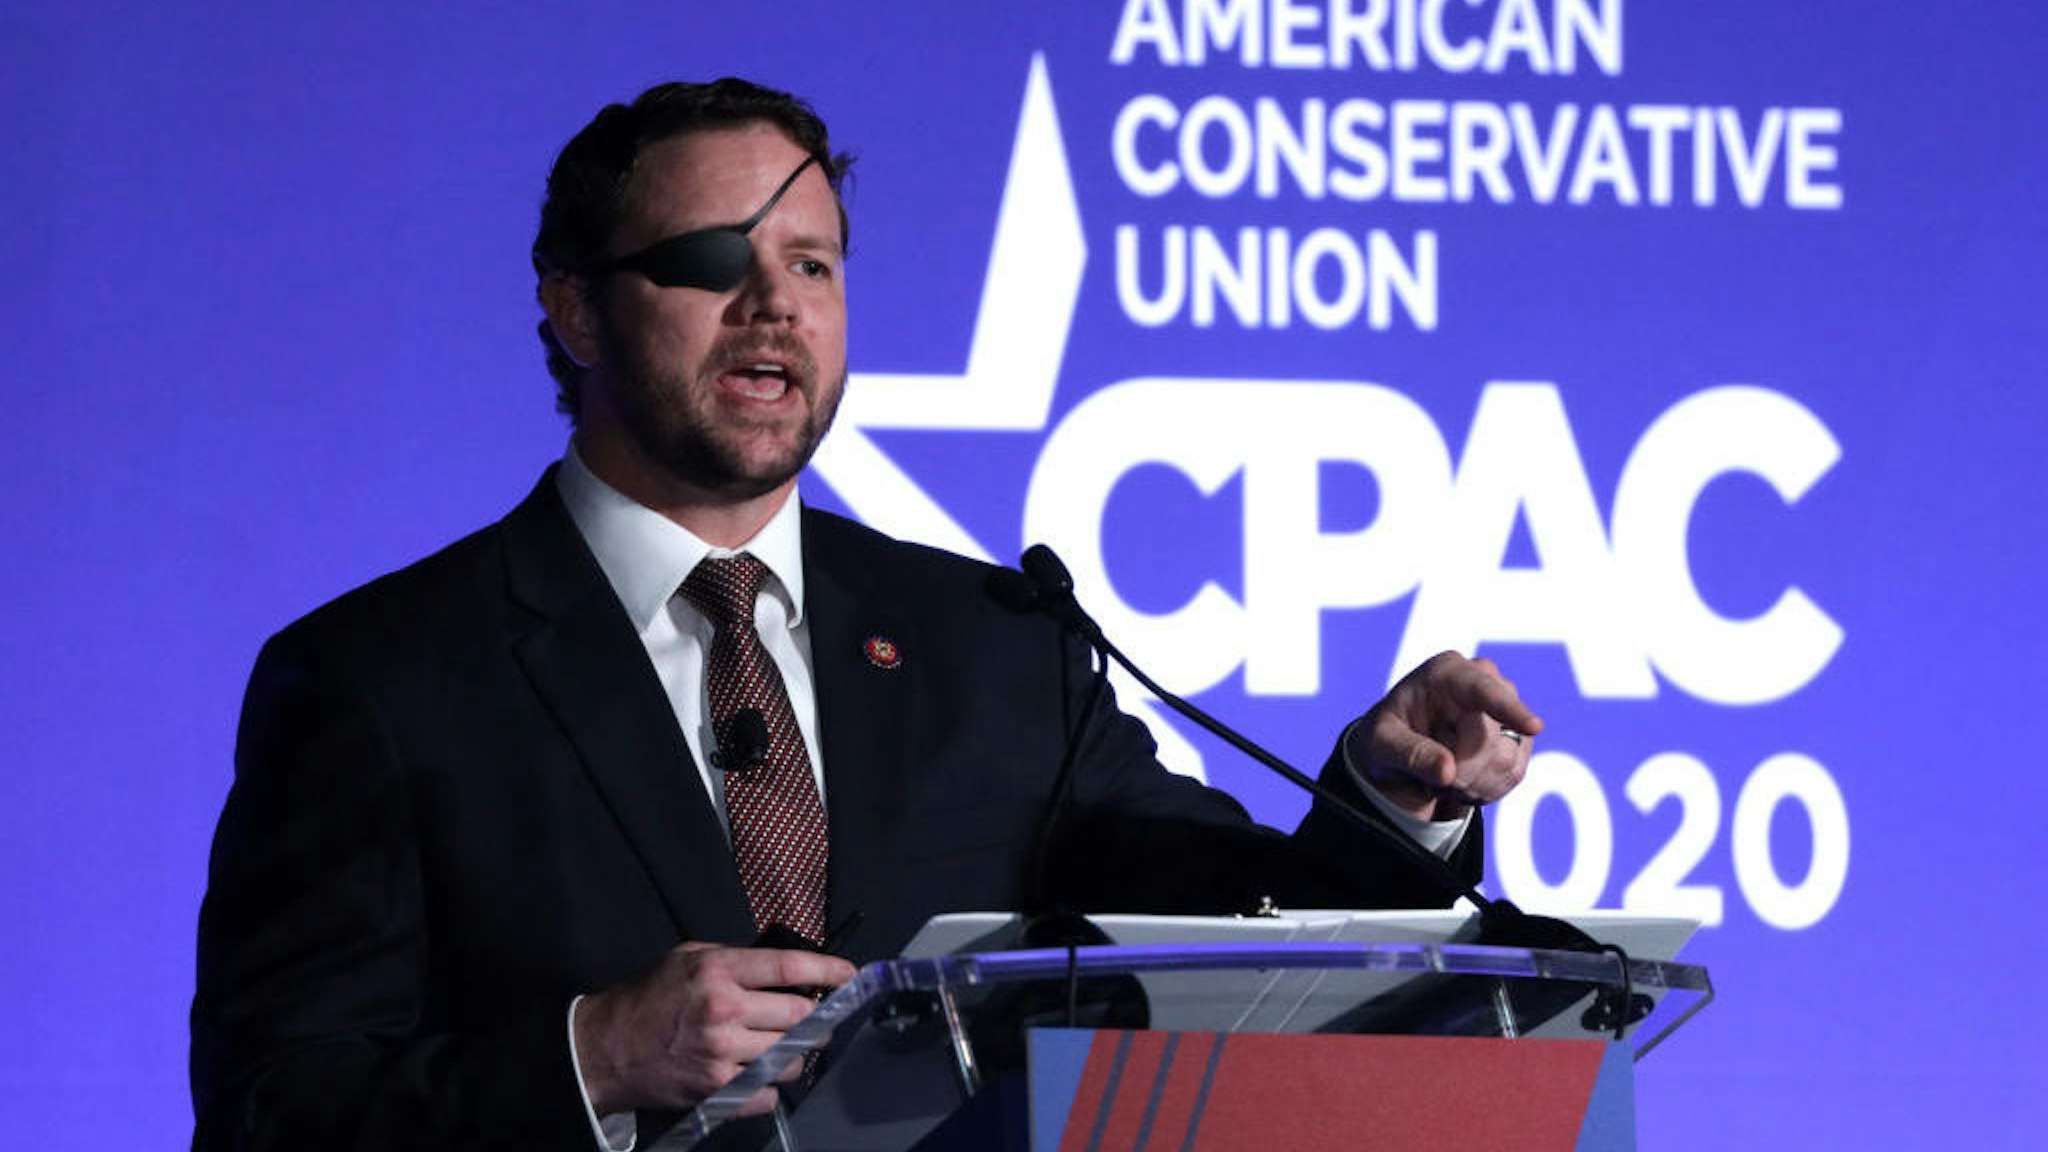 NATIONAL HARBOR, MARYLAND - FEBRUARY 26: U.S. Rep. Dan Crenshaw (R-TX) speaks on “The Fate of Our Culture and Our Nation Hangs in the Balance” during the CPAC Direct Action Training at the annual Conservative Political Action Conference at Gaylord National Resort &amp; Convention Center February 26, 2020 in National Harbor, Maryland. U.S. President Donald Trump is expected to address the annual event on February 29th. (Photo by Alex Wong/Getty Images)